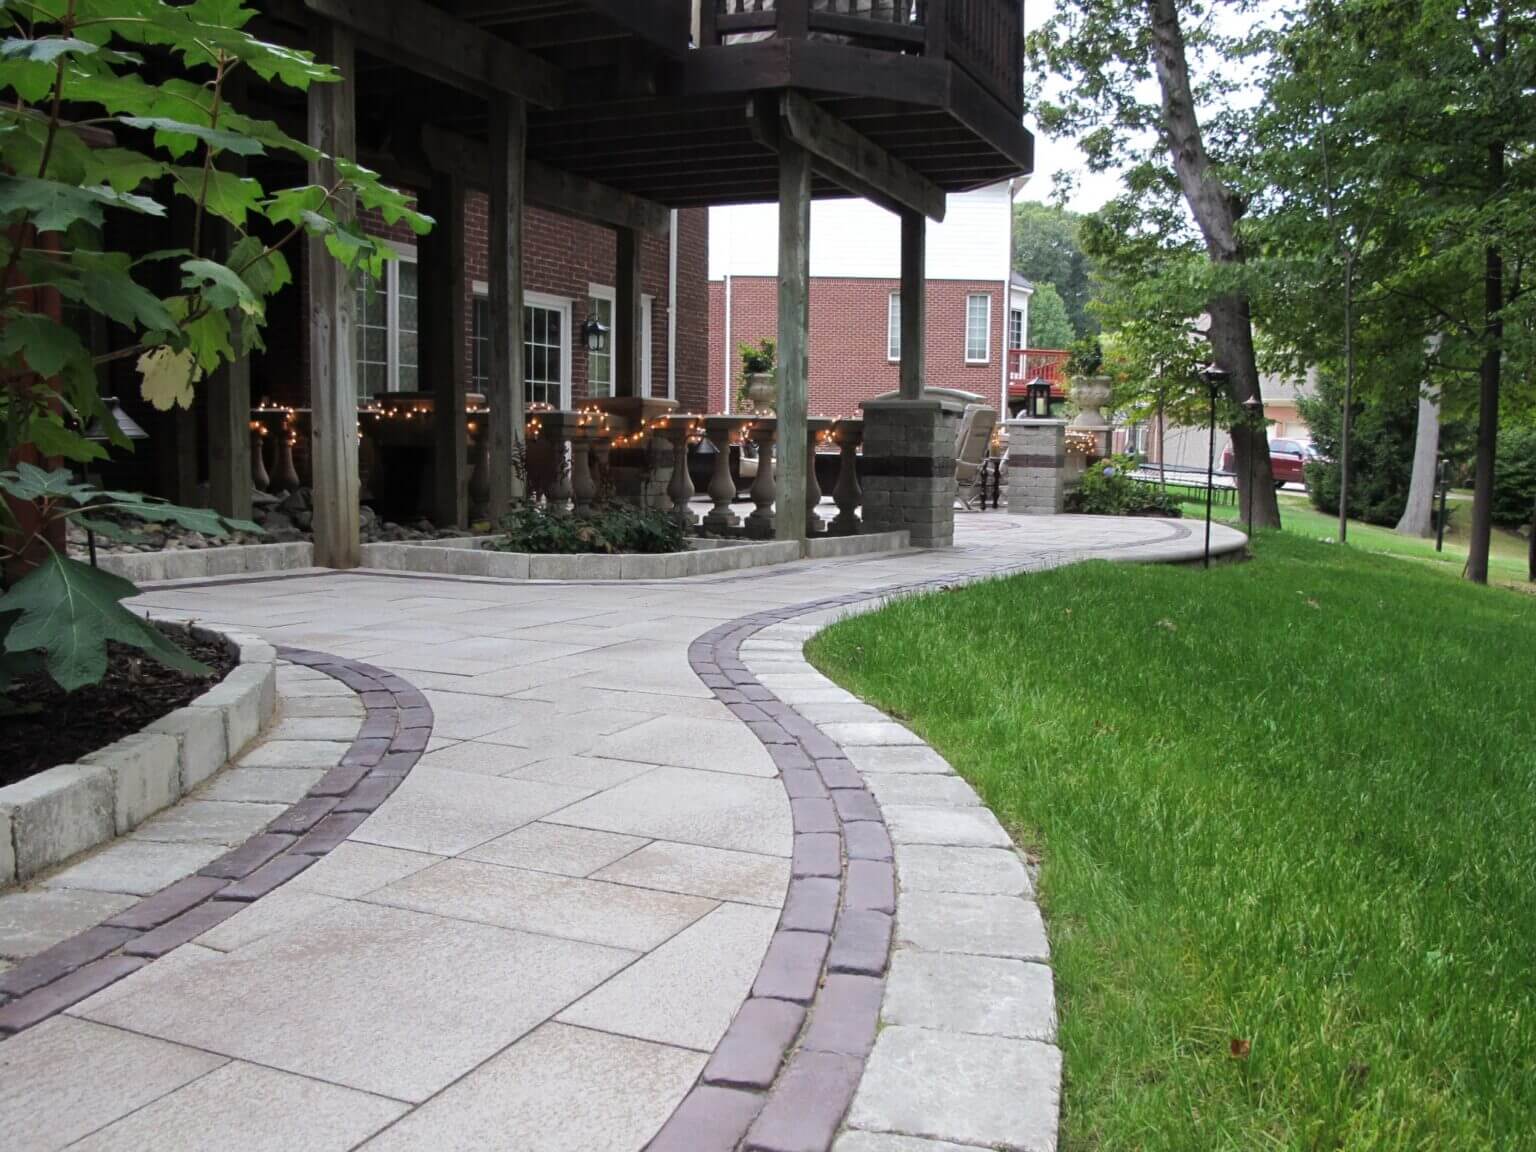 brick paving and water feature design in Rochester Michigan Michigan Pavers Paver Installation Michigan Paver Contractors in Michigan Best Pavers in Michigan Michigan Patio Pavers Driveway Pavers Michigan Walkway Pavers Michigan Michigan Paver Stones Custom Pavers Michigan Michigan Paver Design Paver Repair Michigan